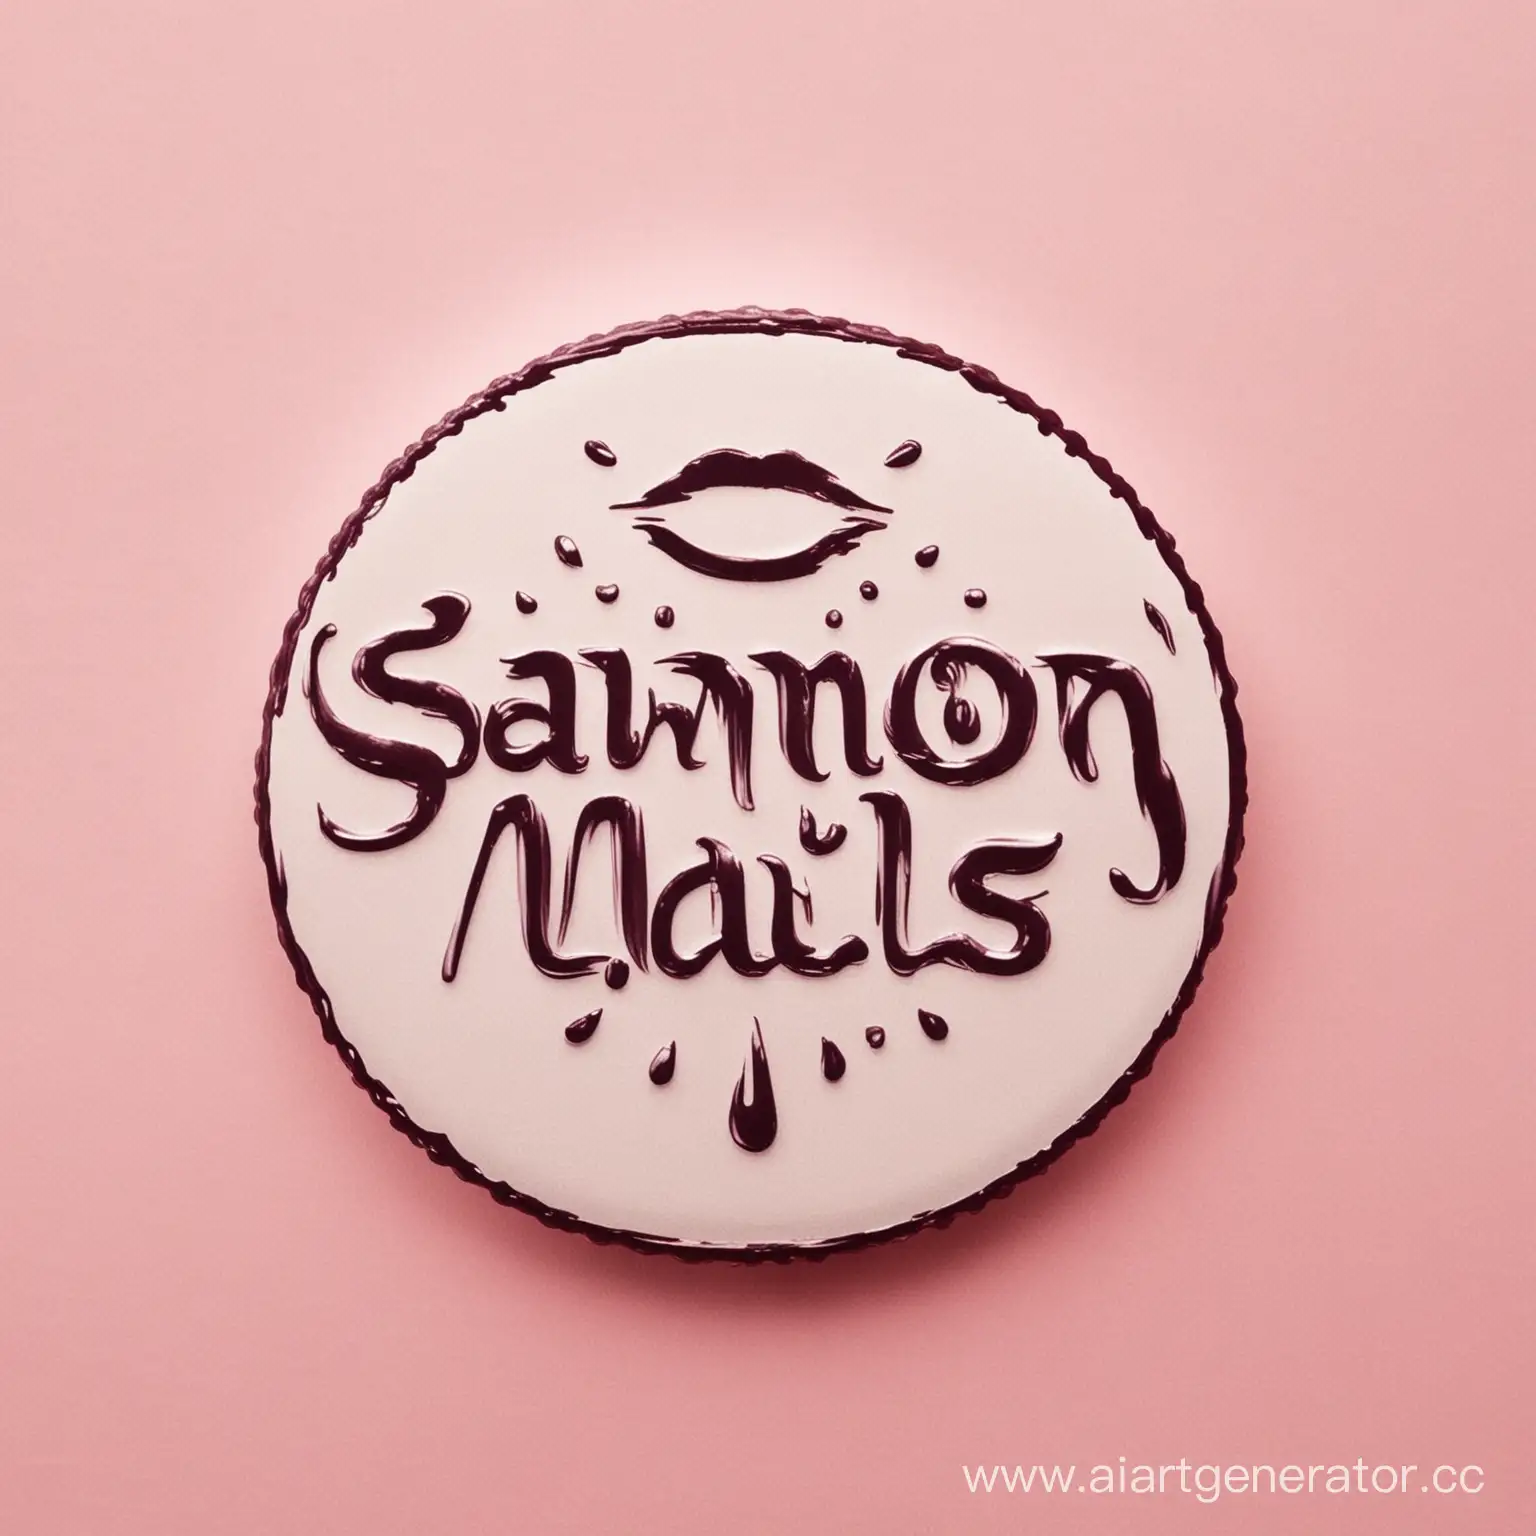 Logo with the text "SAAMOON NAILS" for a nail salon